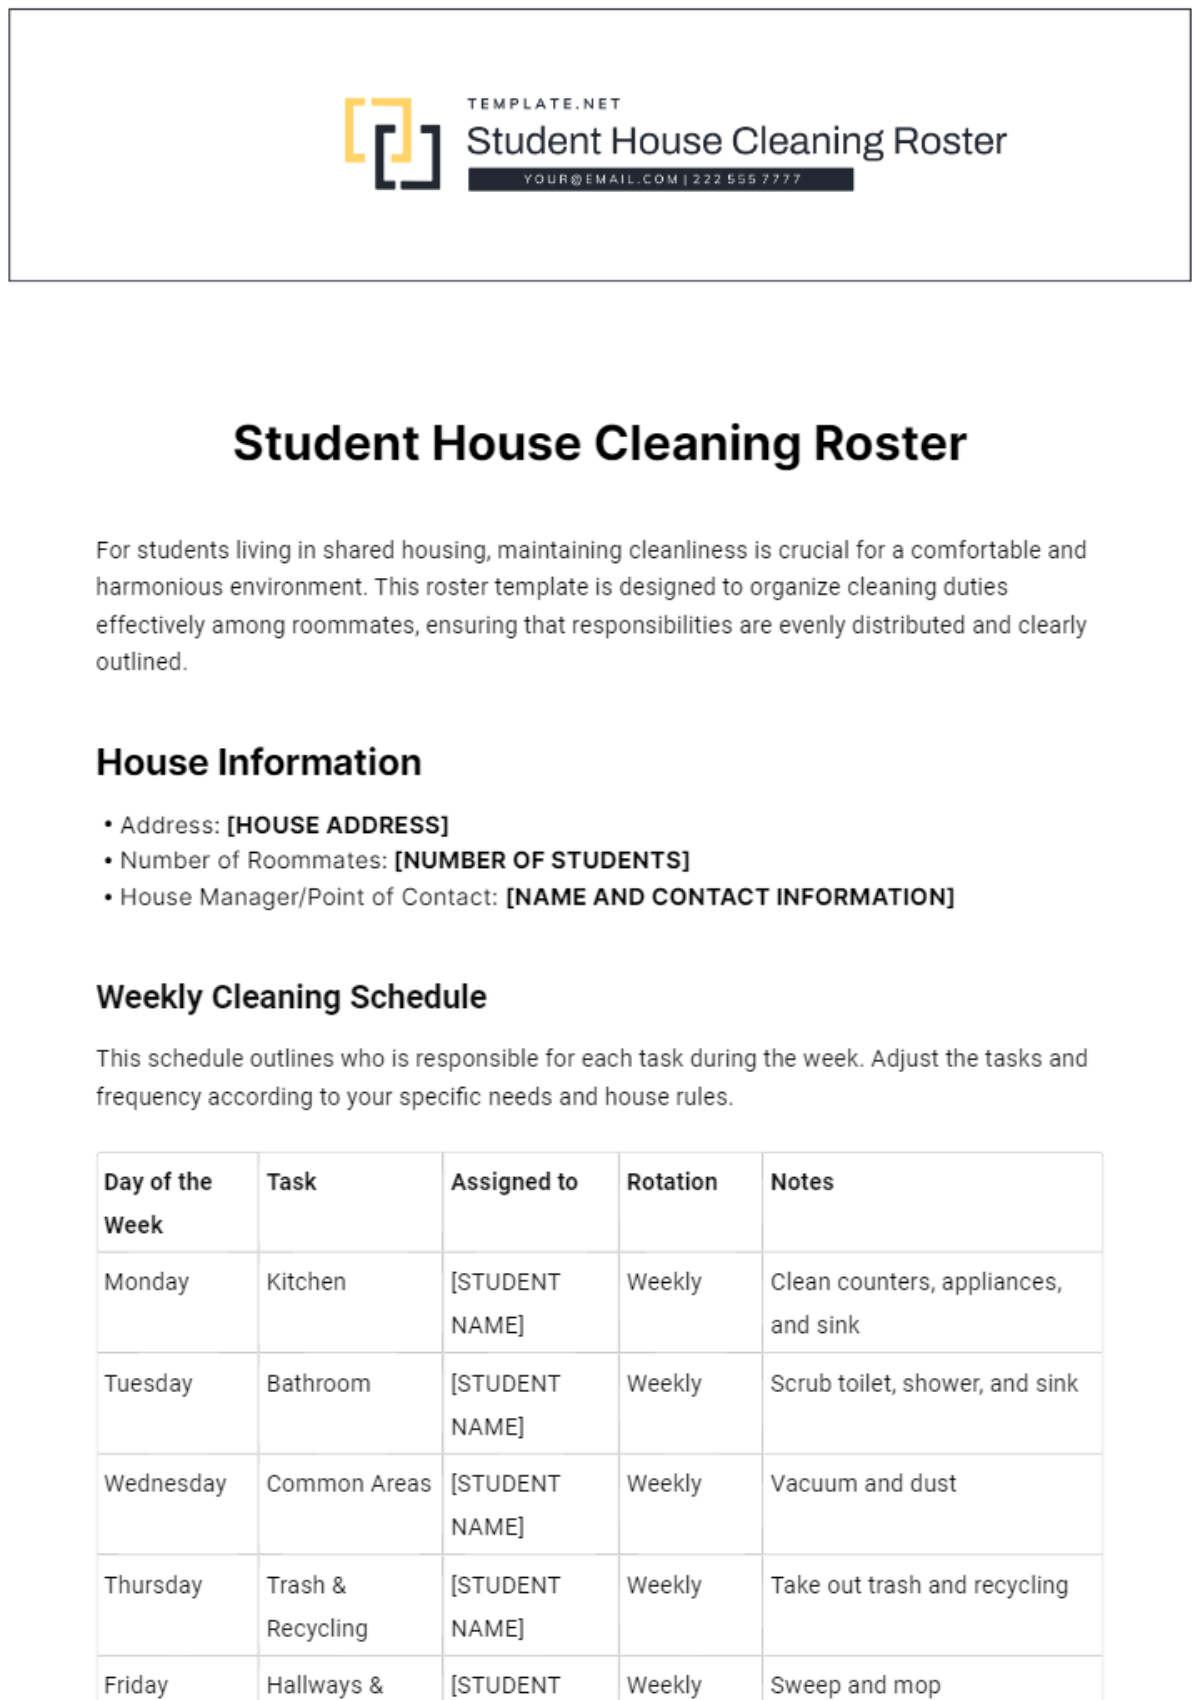 Student House Cleaning Roster Template